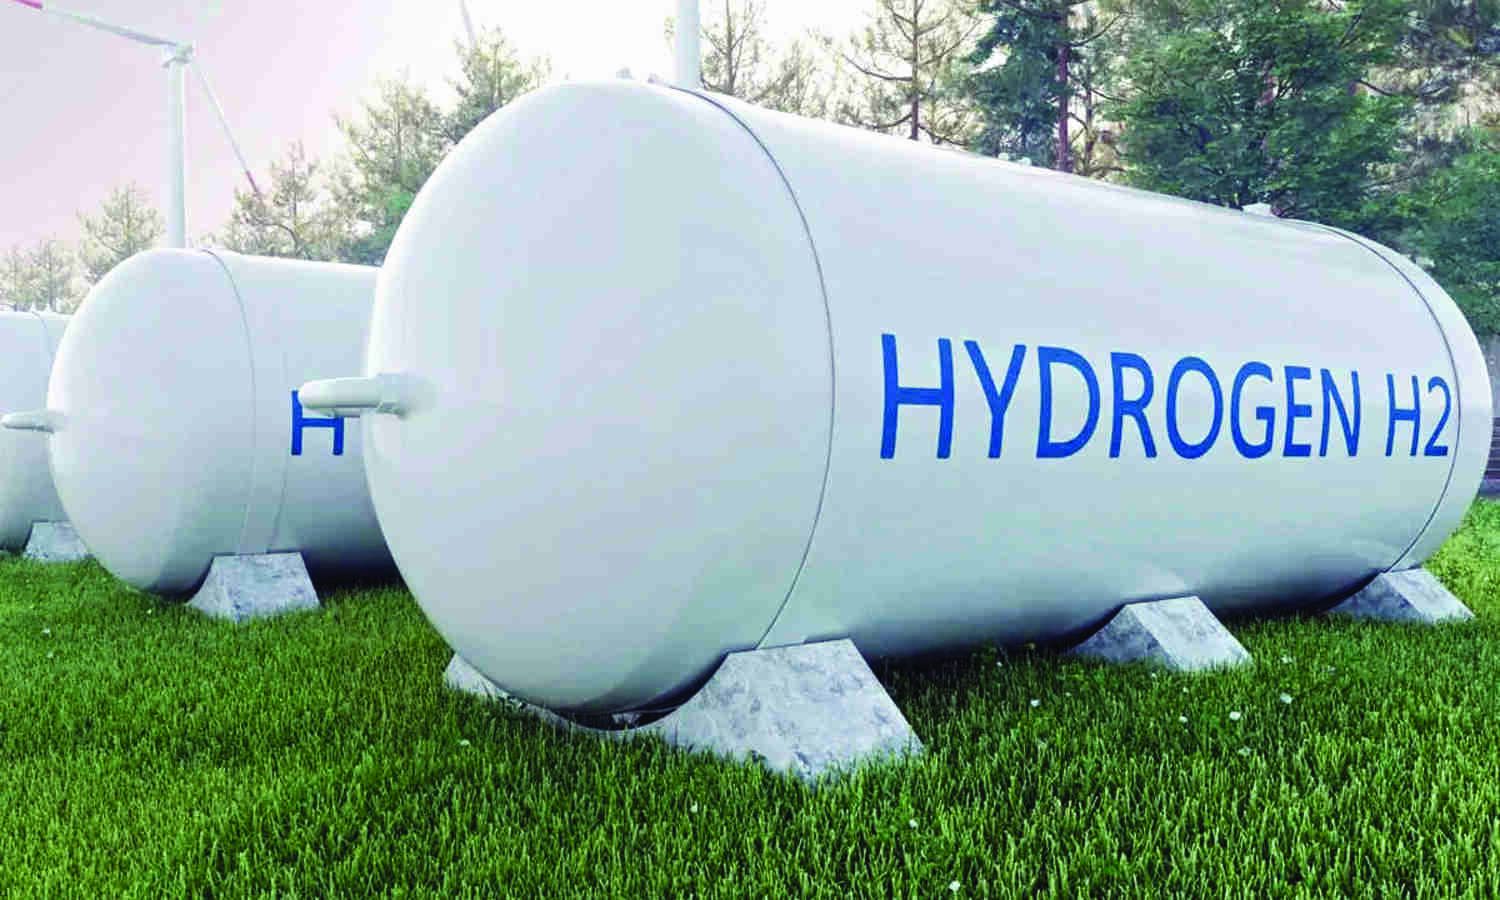 EIB keen to extend 1 bn euro for green hydrogen, RE projects in India